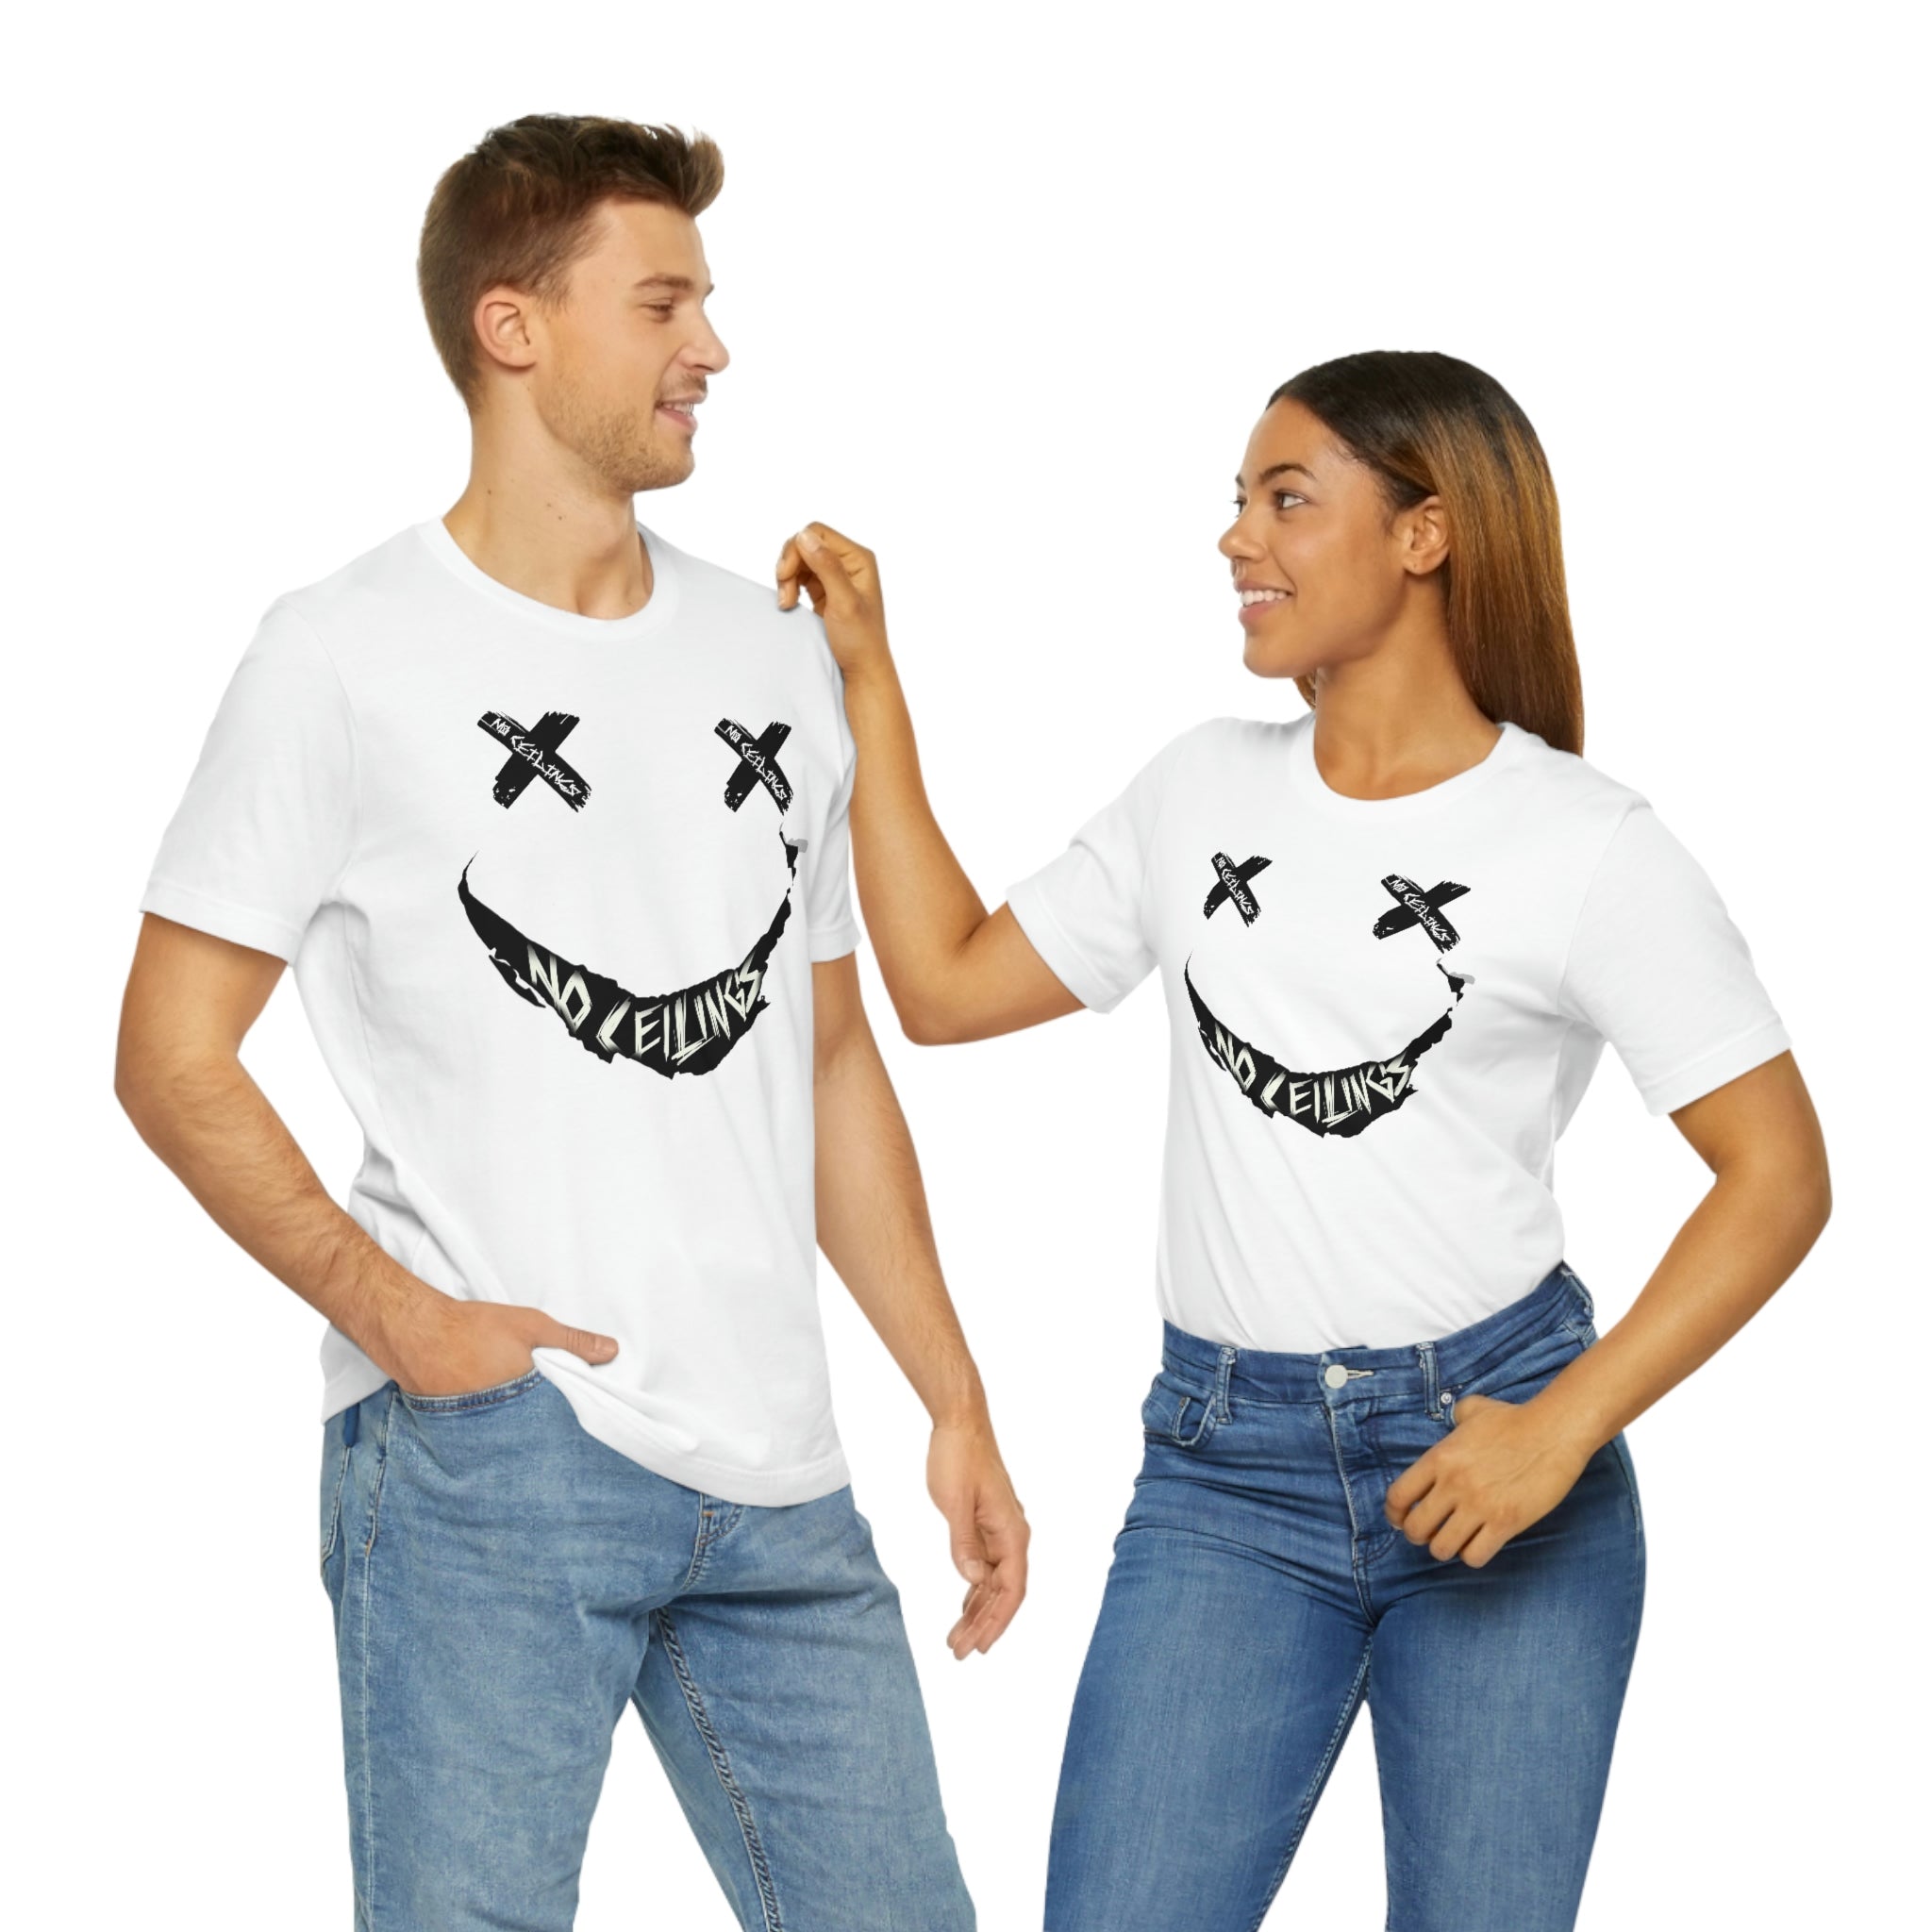 Smile in Wht/Blk Unisex Jersey Short Sleeve Tee - NoCeilingsClothing